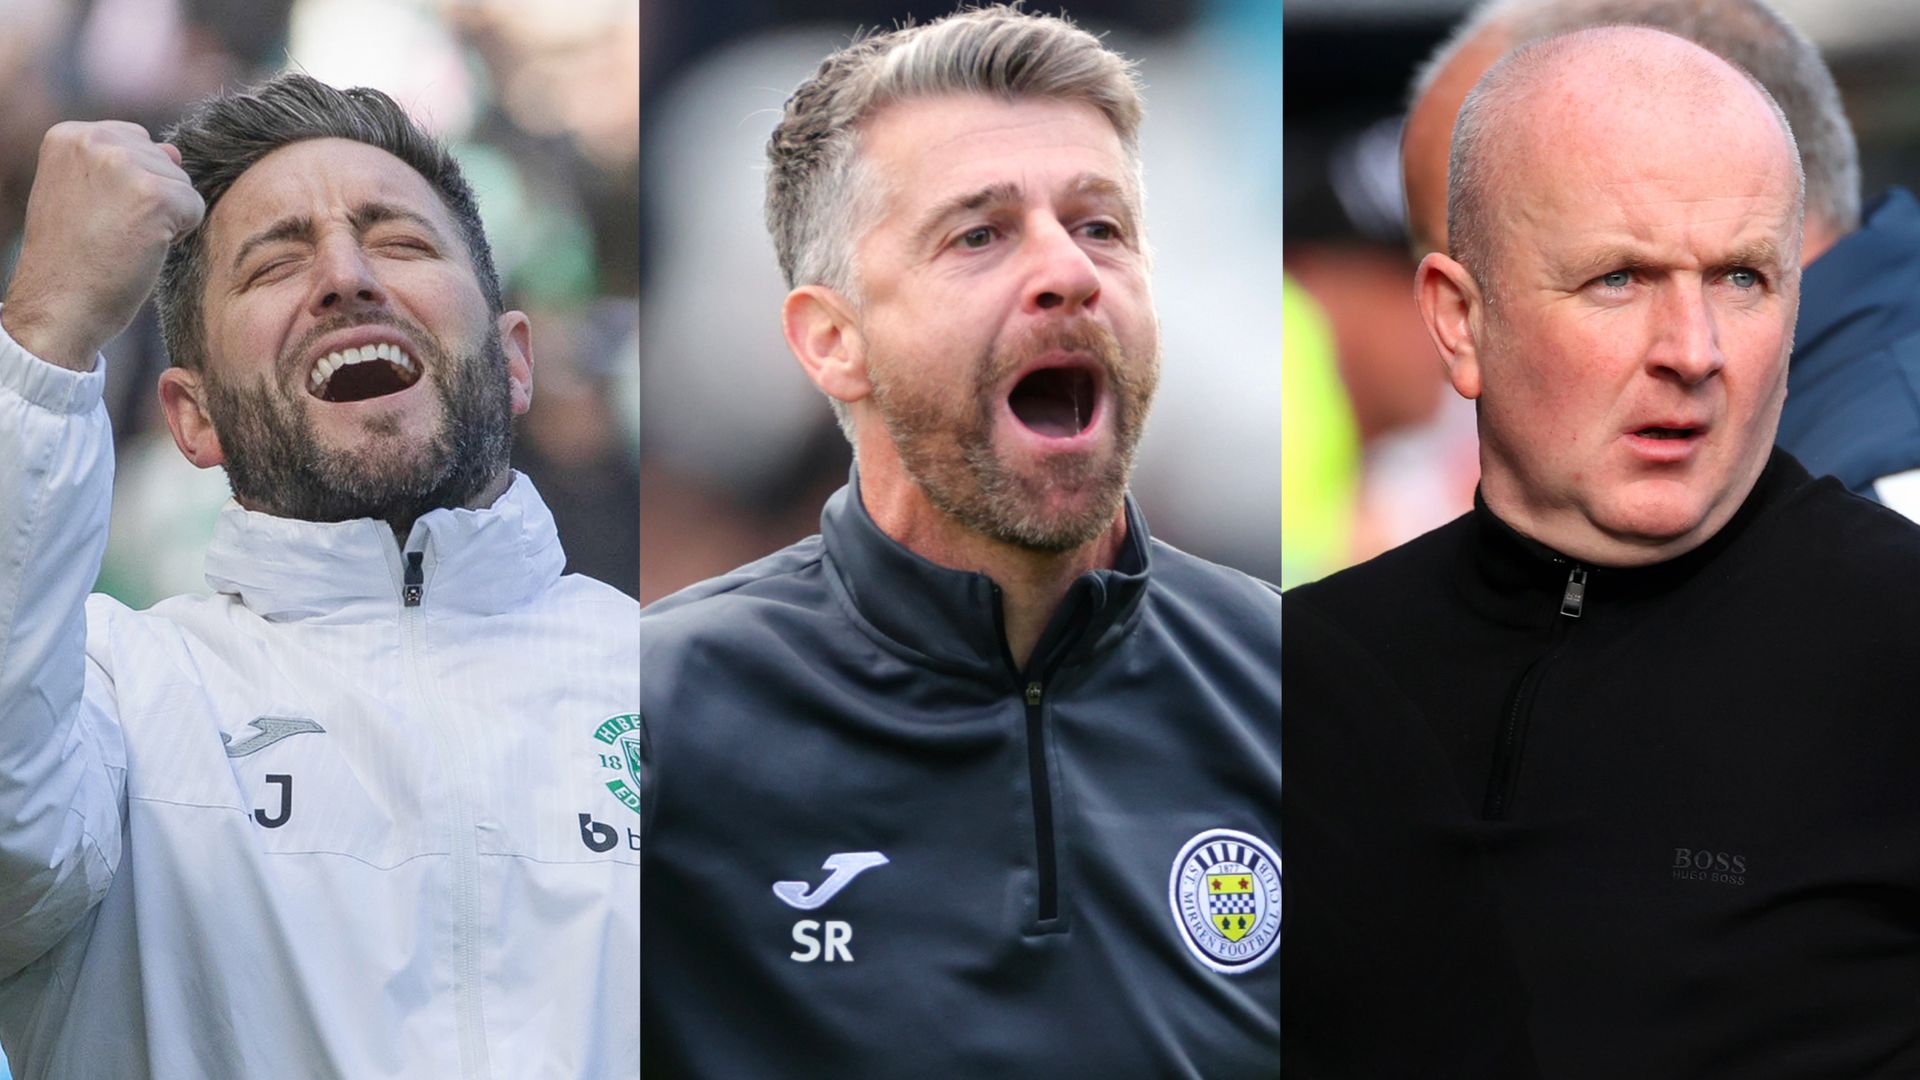 Scottish Premiership: Who will clinch a place in the top six